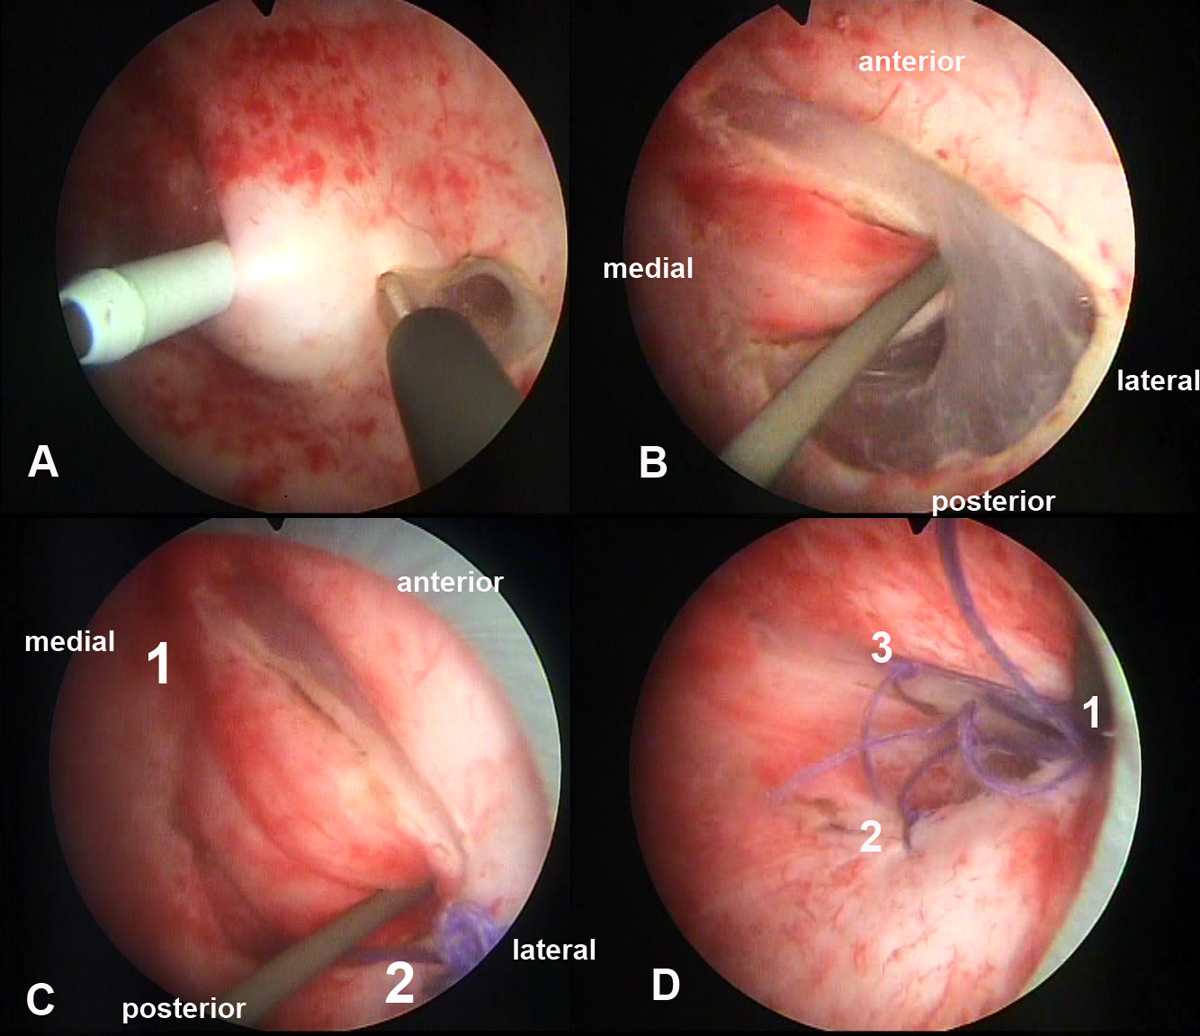 Novel application of the sewing machine principle; a new simplified  intracorporeal suturing technique for pediatric inguinal her